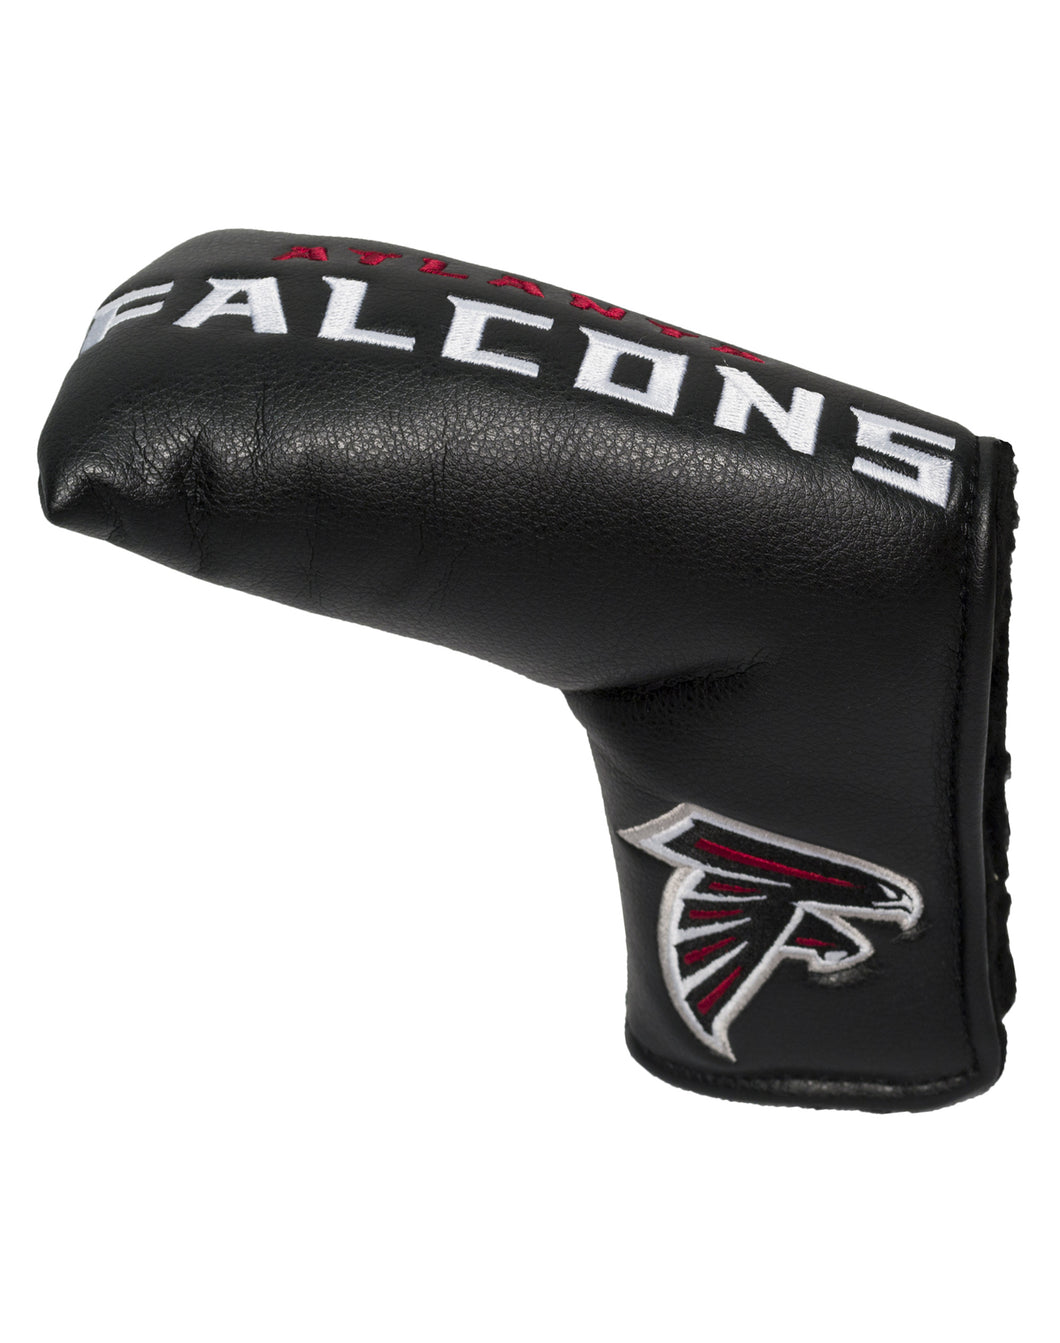 NFL Official Vintage Golf Blade Style Putter Headcover. Atlanta Falcons.